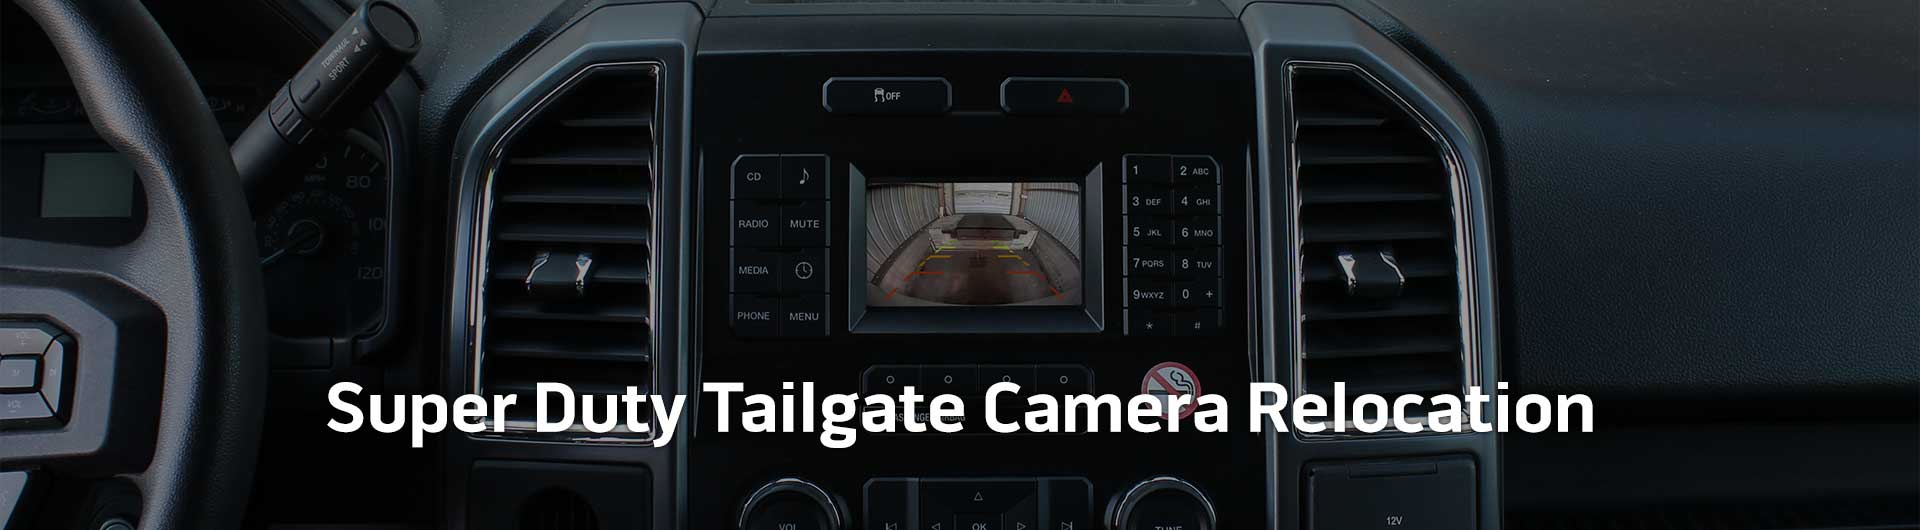 An image showing the in-dash monitor of a Ford truck. On the screen is an image from the backup camera.